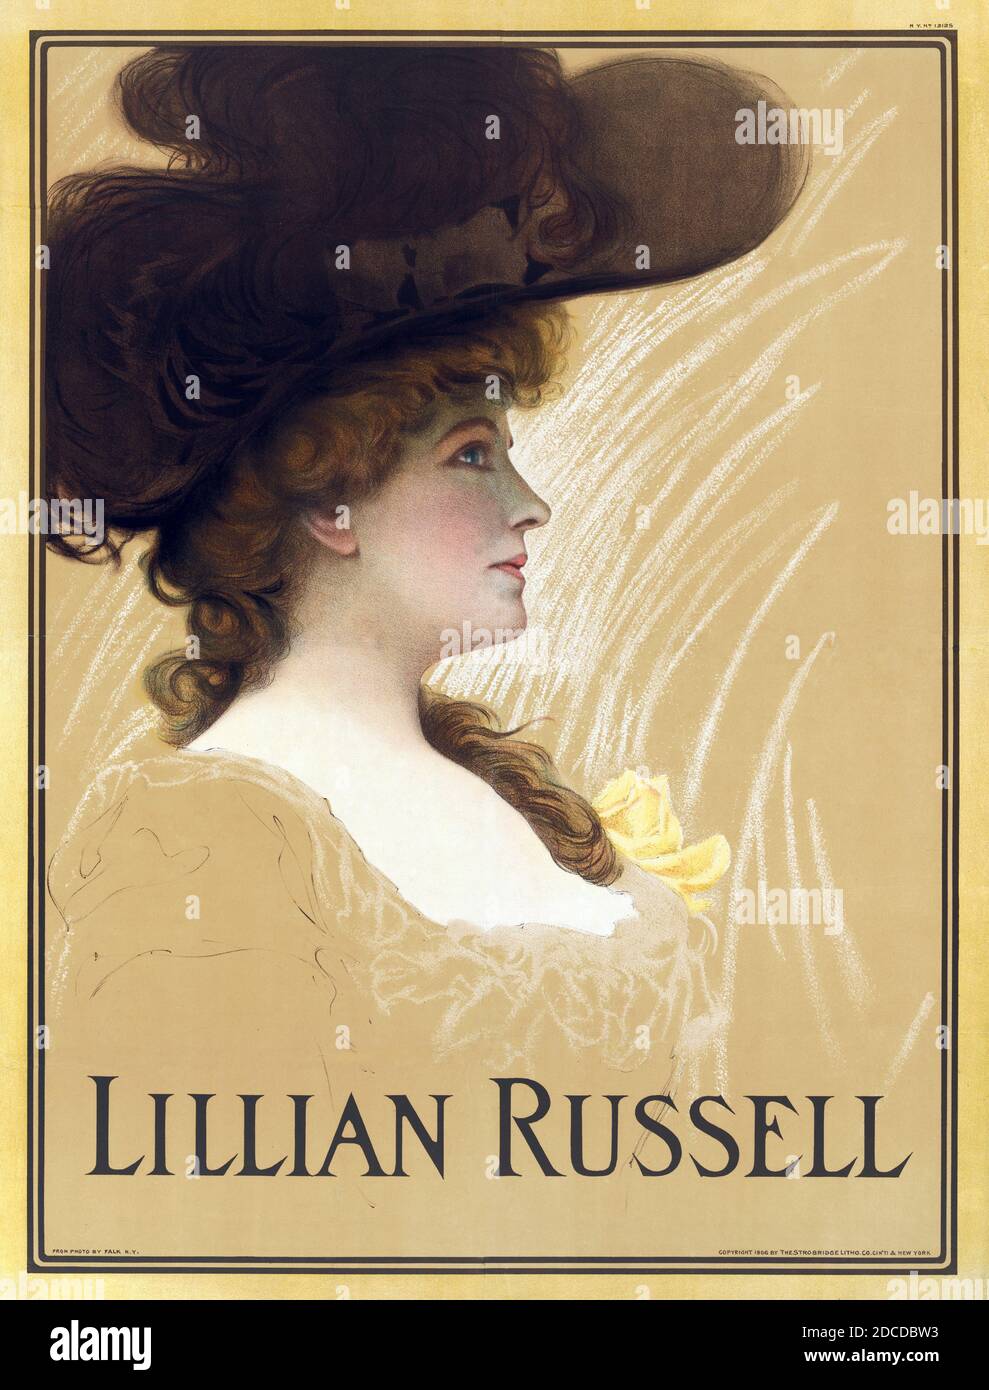 Lillian Russell, American Entertainer Stock Photo